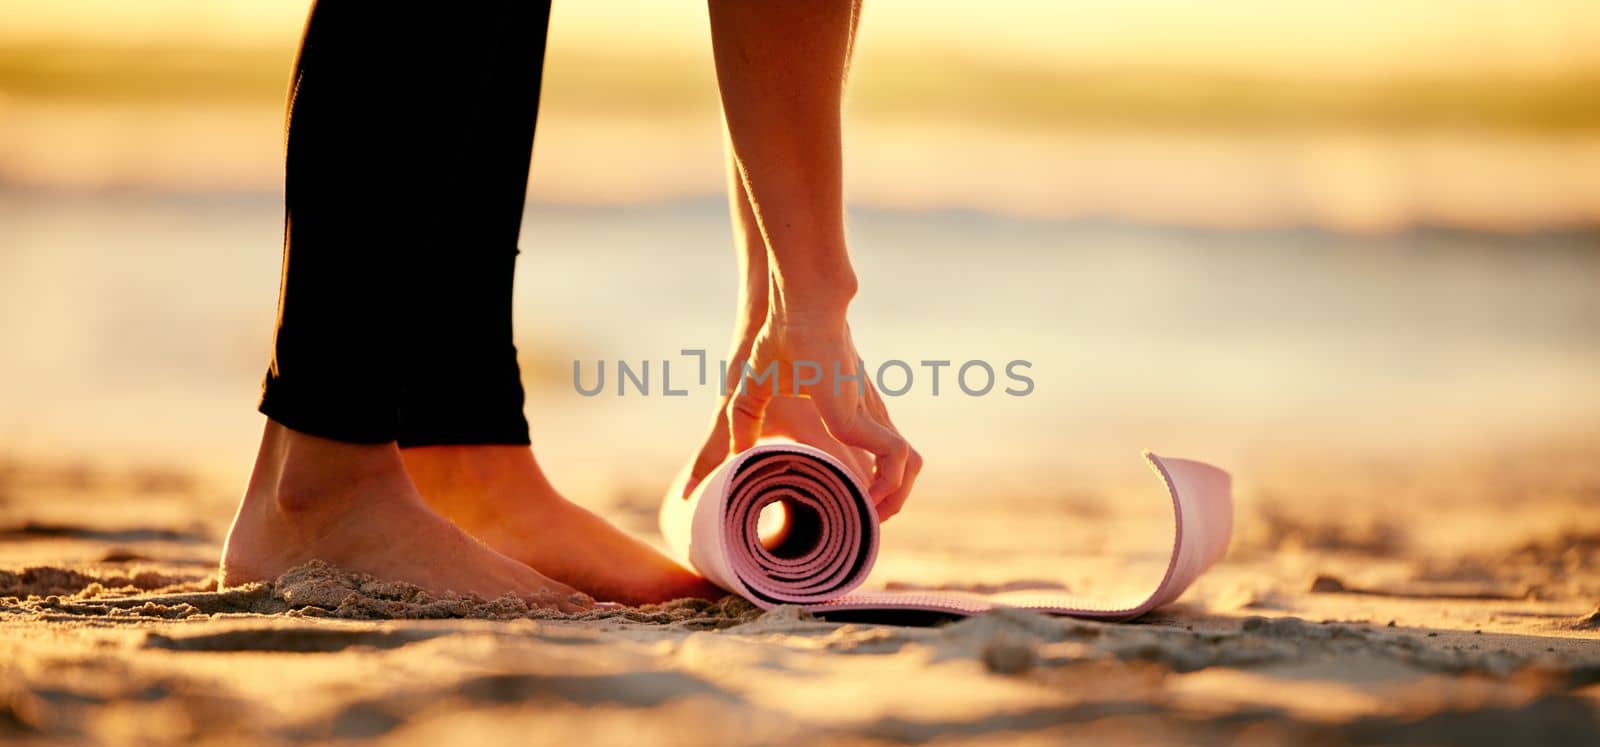 Hands, beach and woman roll yoga mat to start workout, exercise or stretching. Zen, meditation and feet of female yogi outdoors on seashore while preparing for chakra training, exercising and pilates.